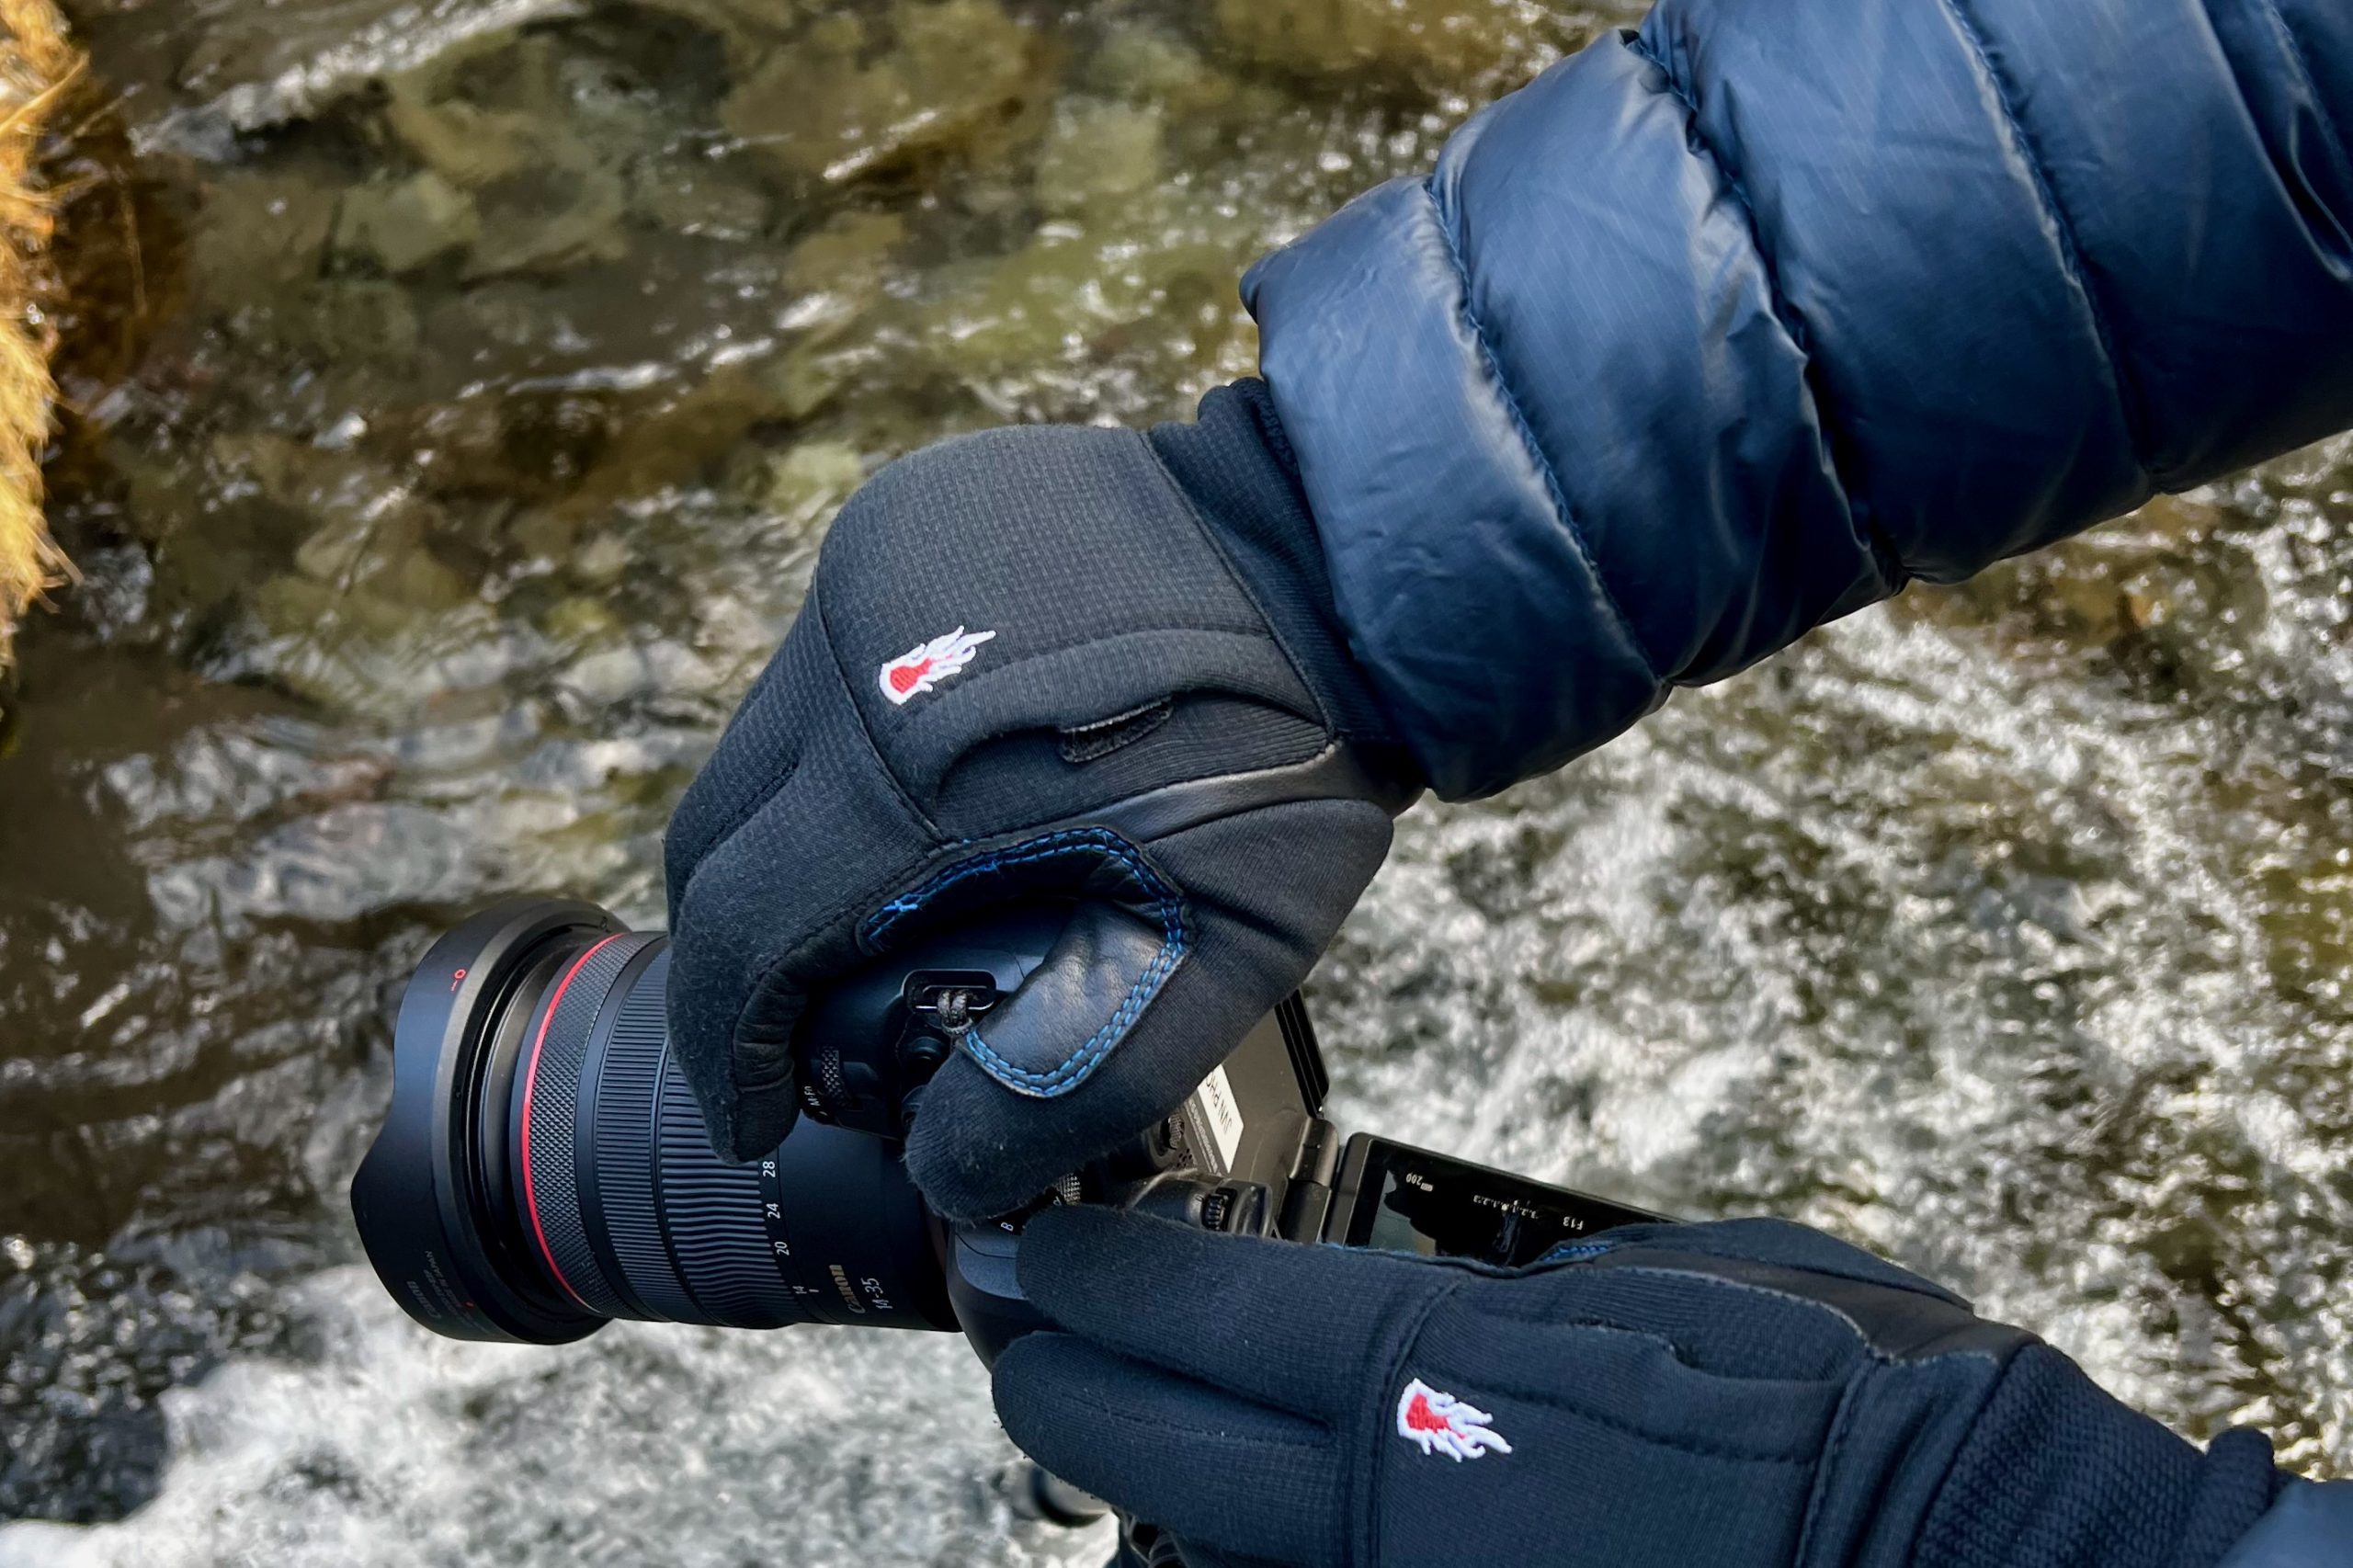 Review - The Heat Company Photography Gloves